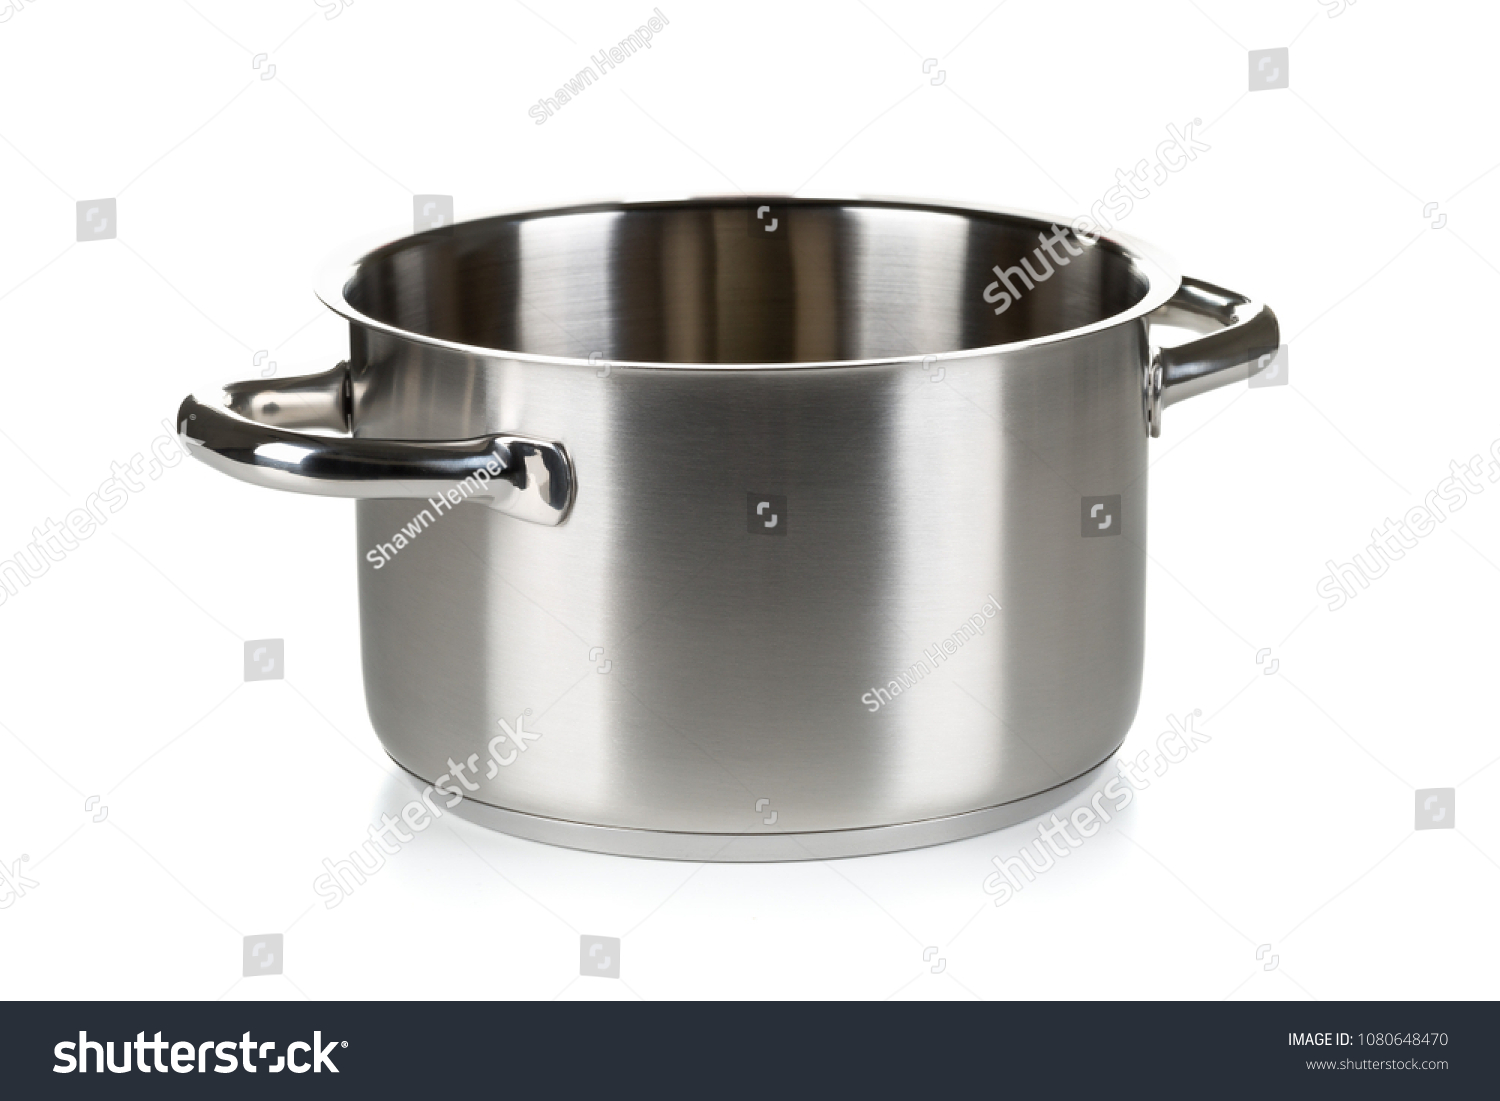 Open stainless steel cooking pot over white background #1080648470